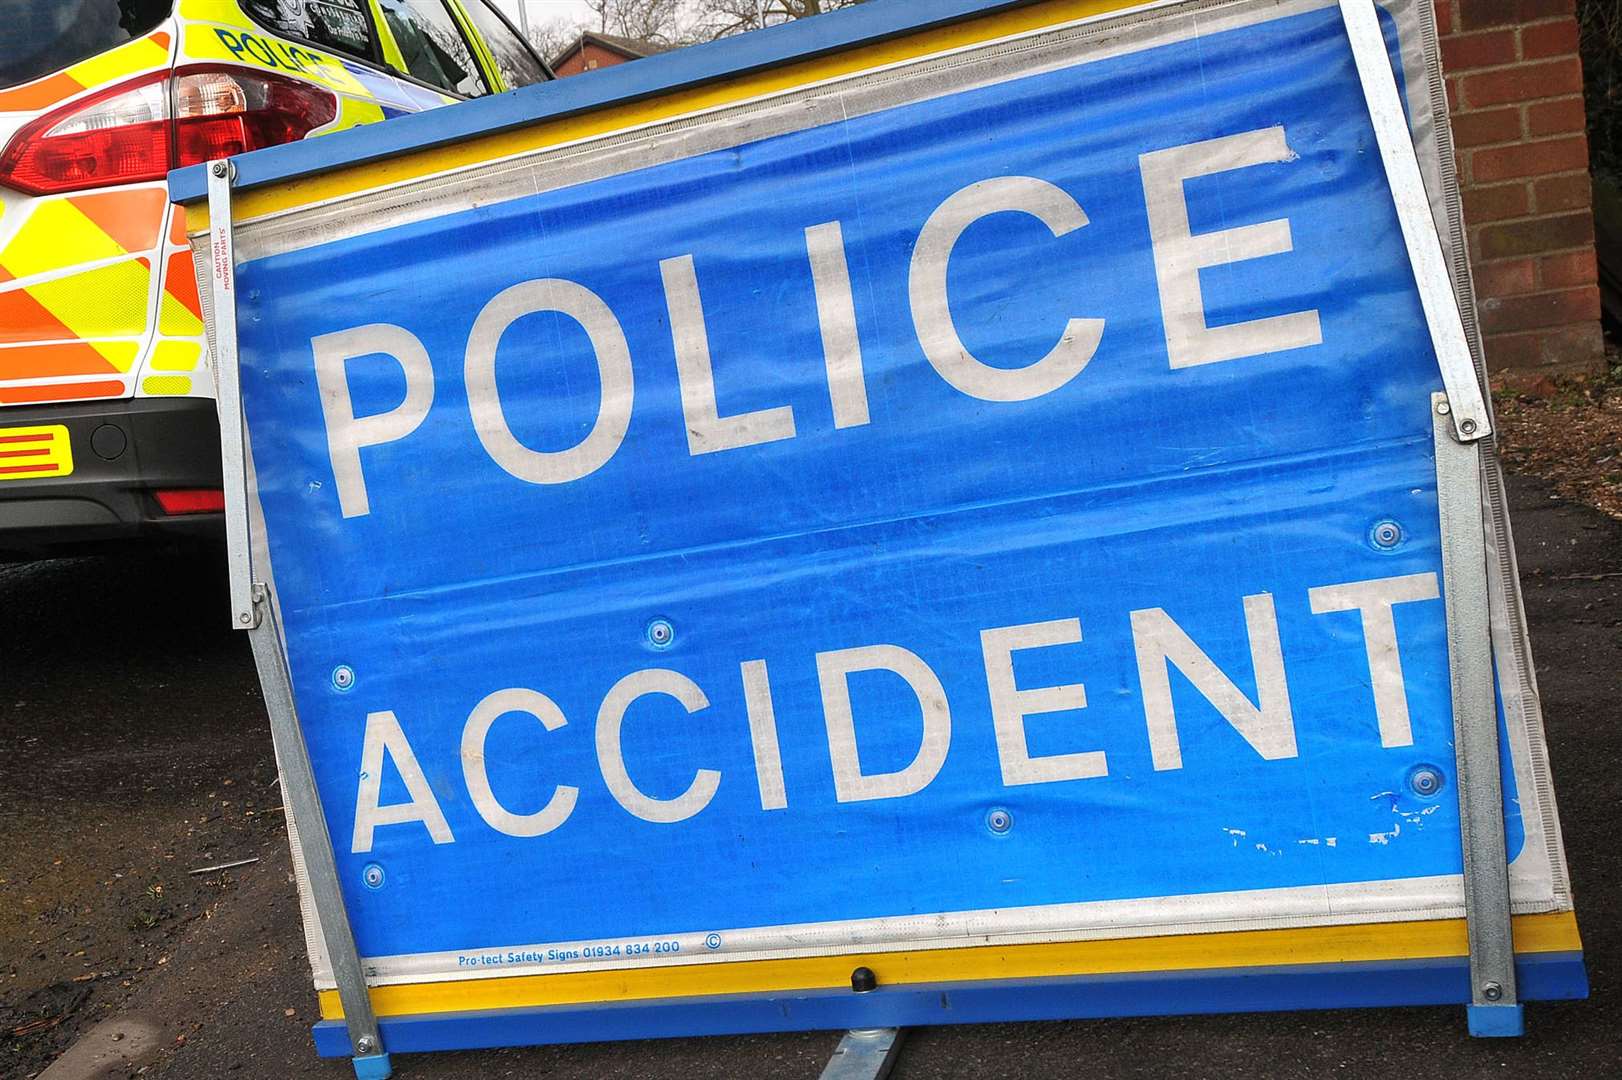 An accident has closed roads around junction 8 of the M20 for Maidstone services